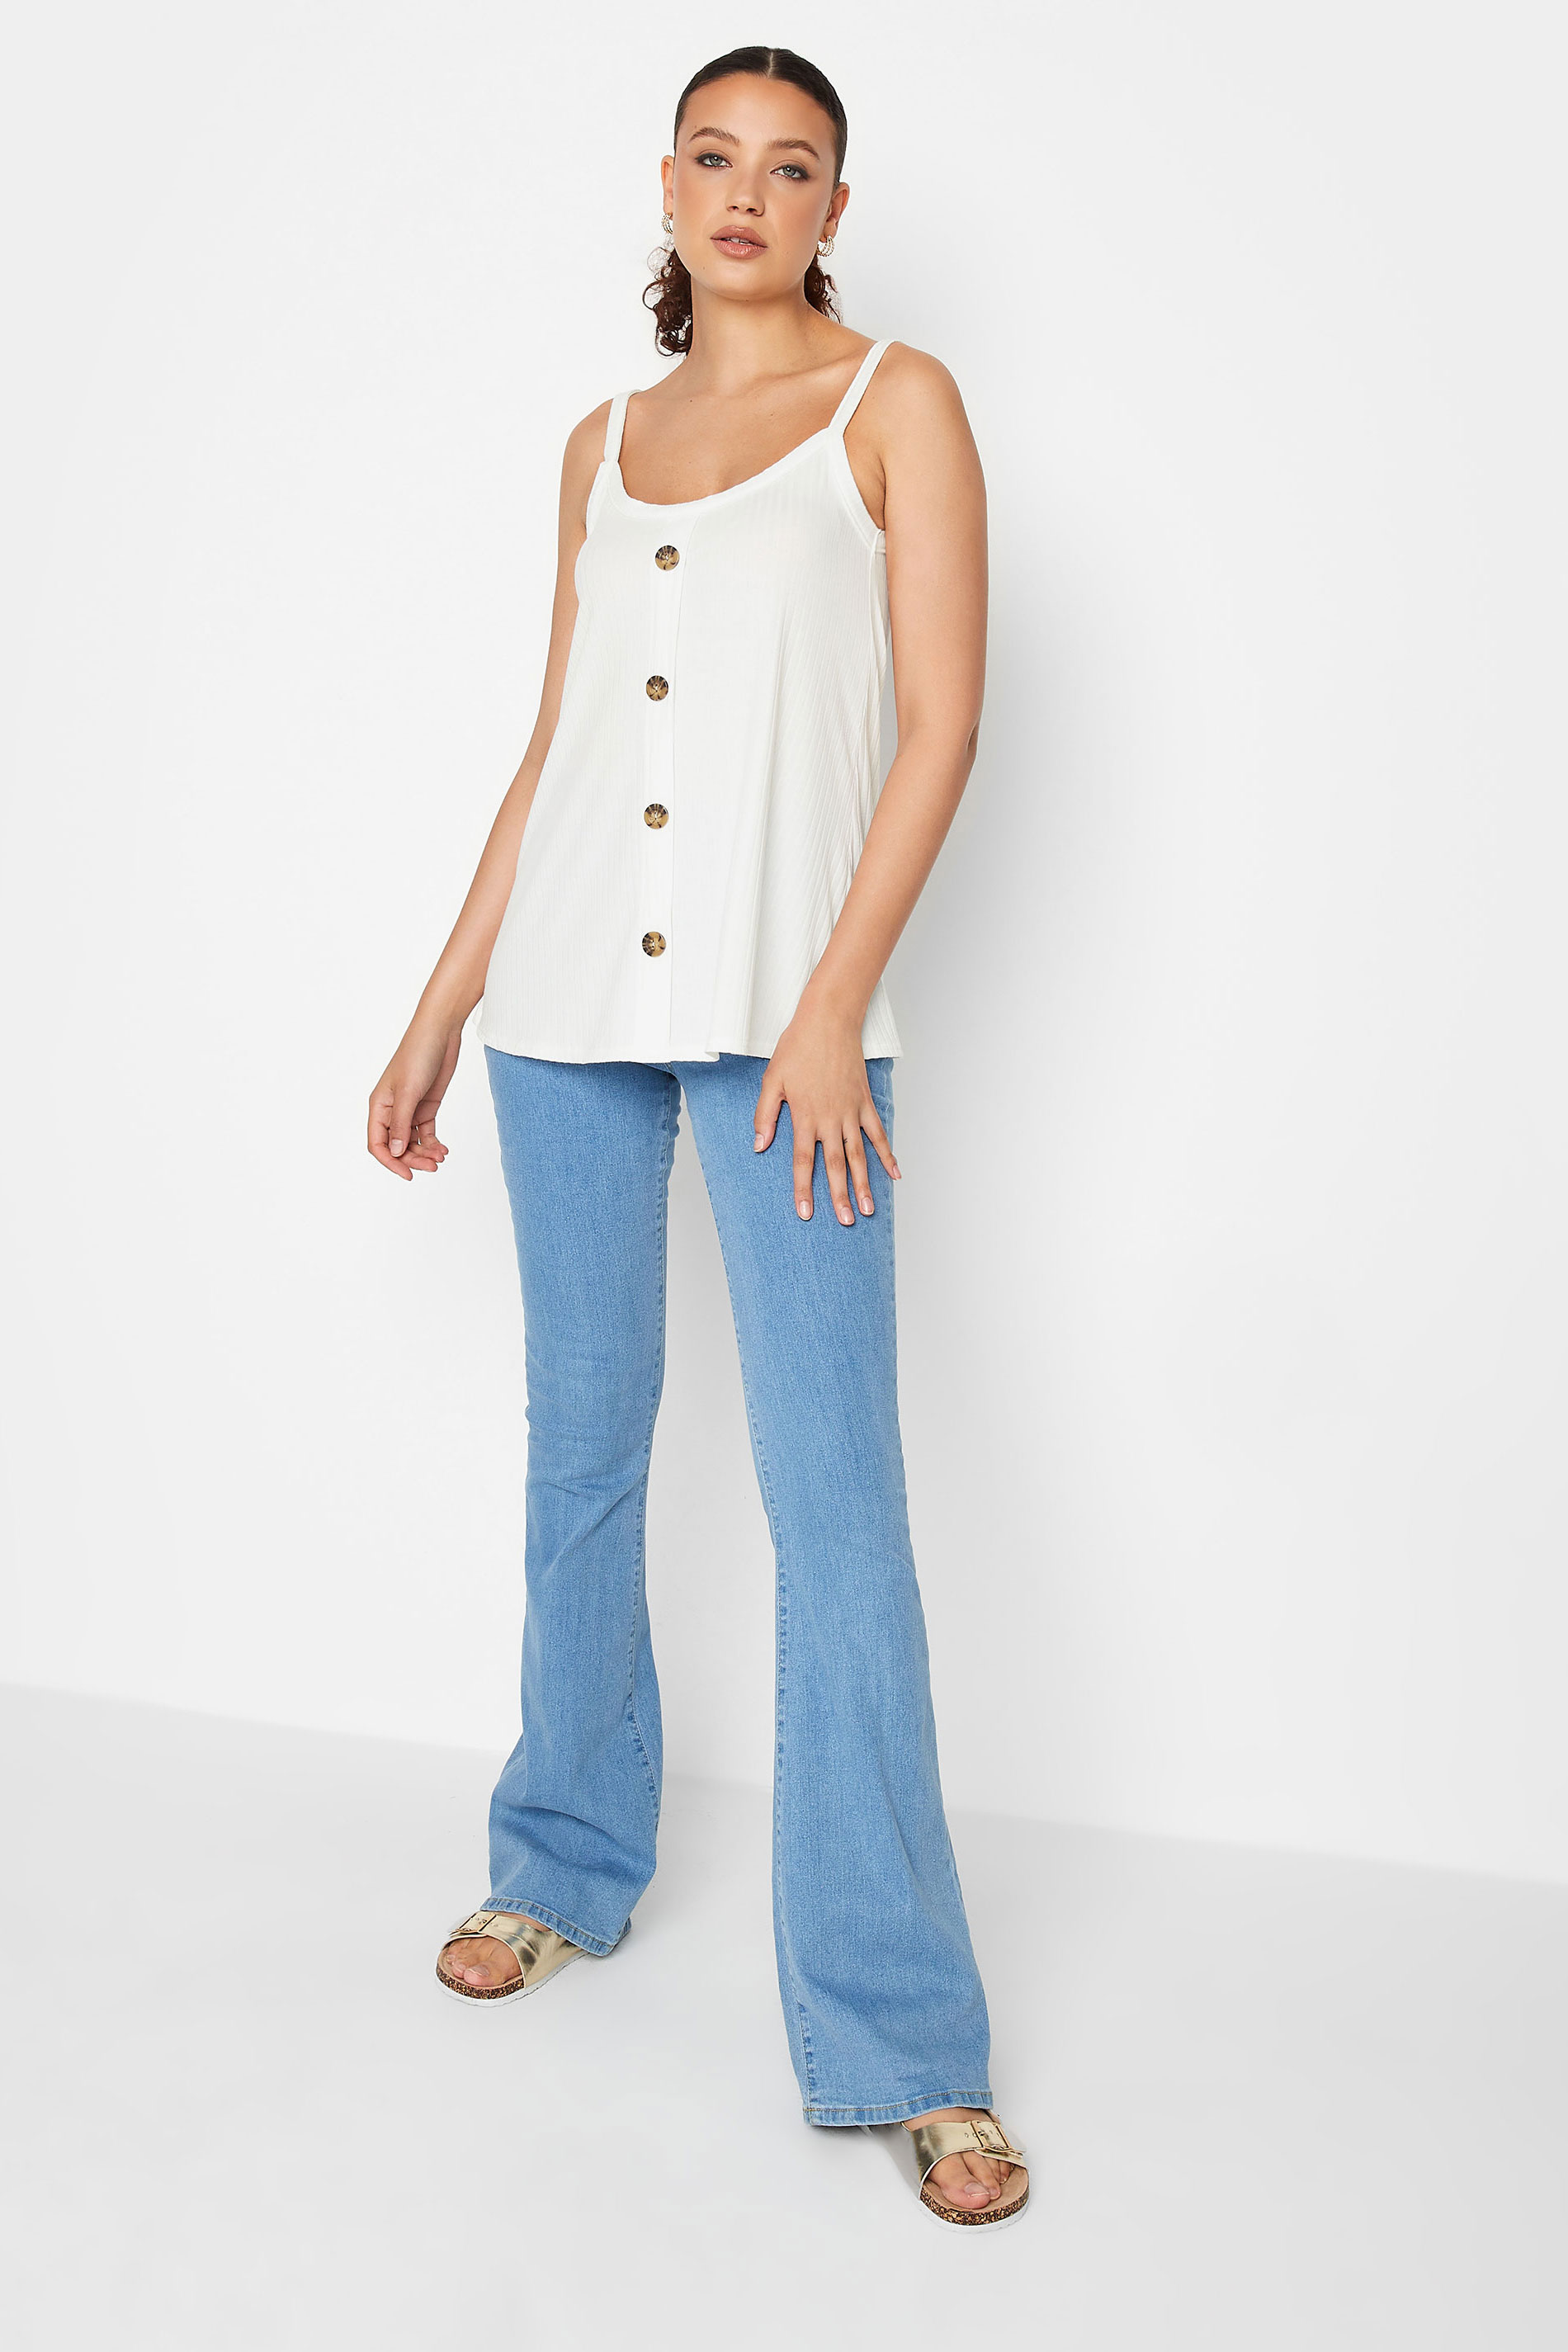 LTS Tall White Ribbed Button Cami Vest Top | Long Tall Sally 2